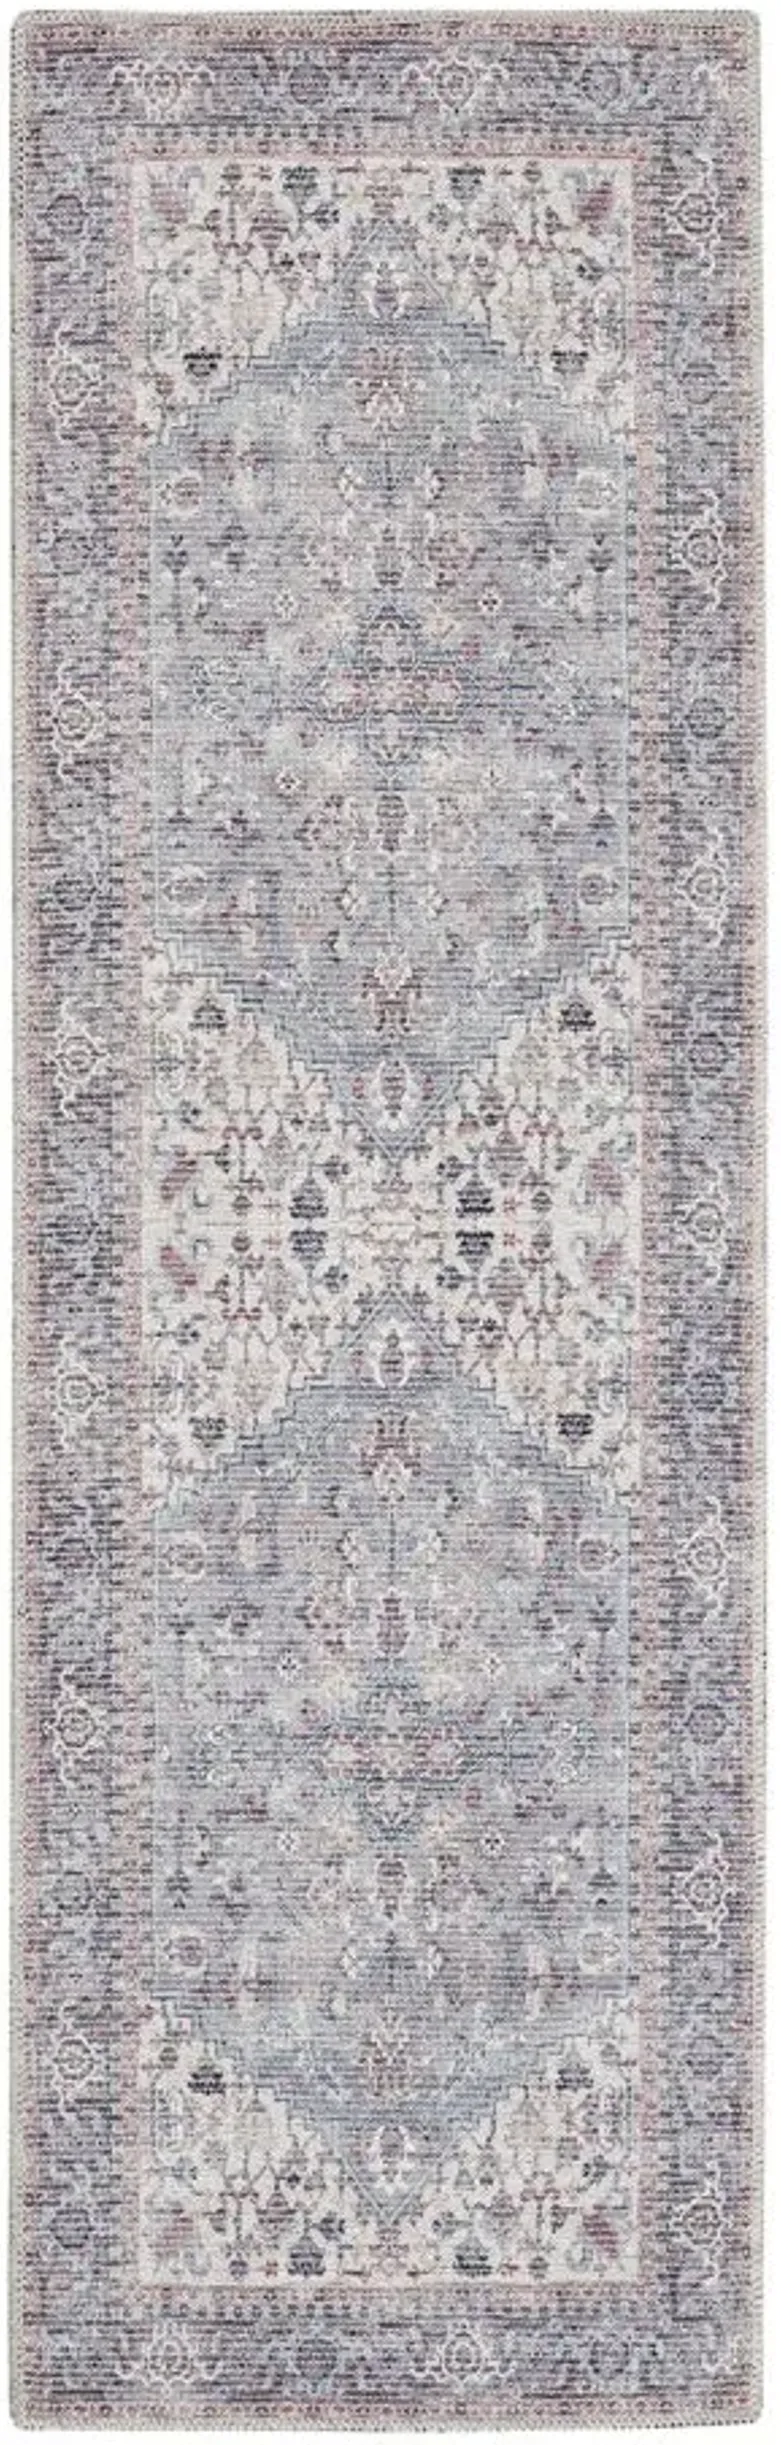 Nicole Curtis Albuquerque Runner Rug in Gray by Nourison